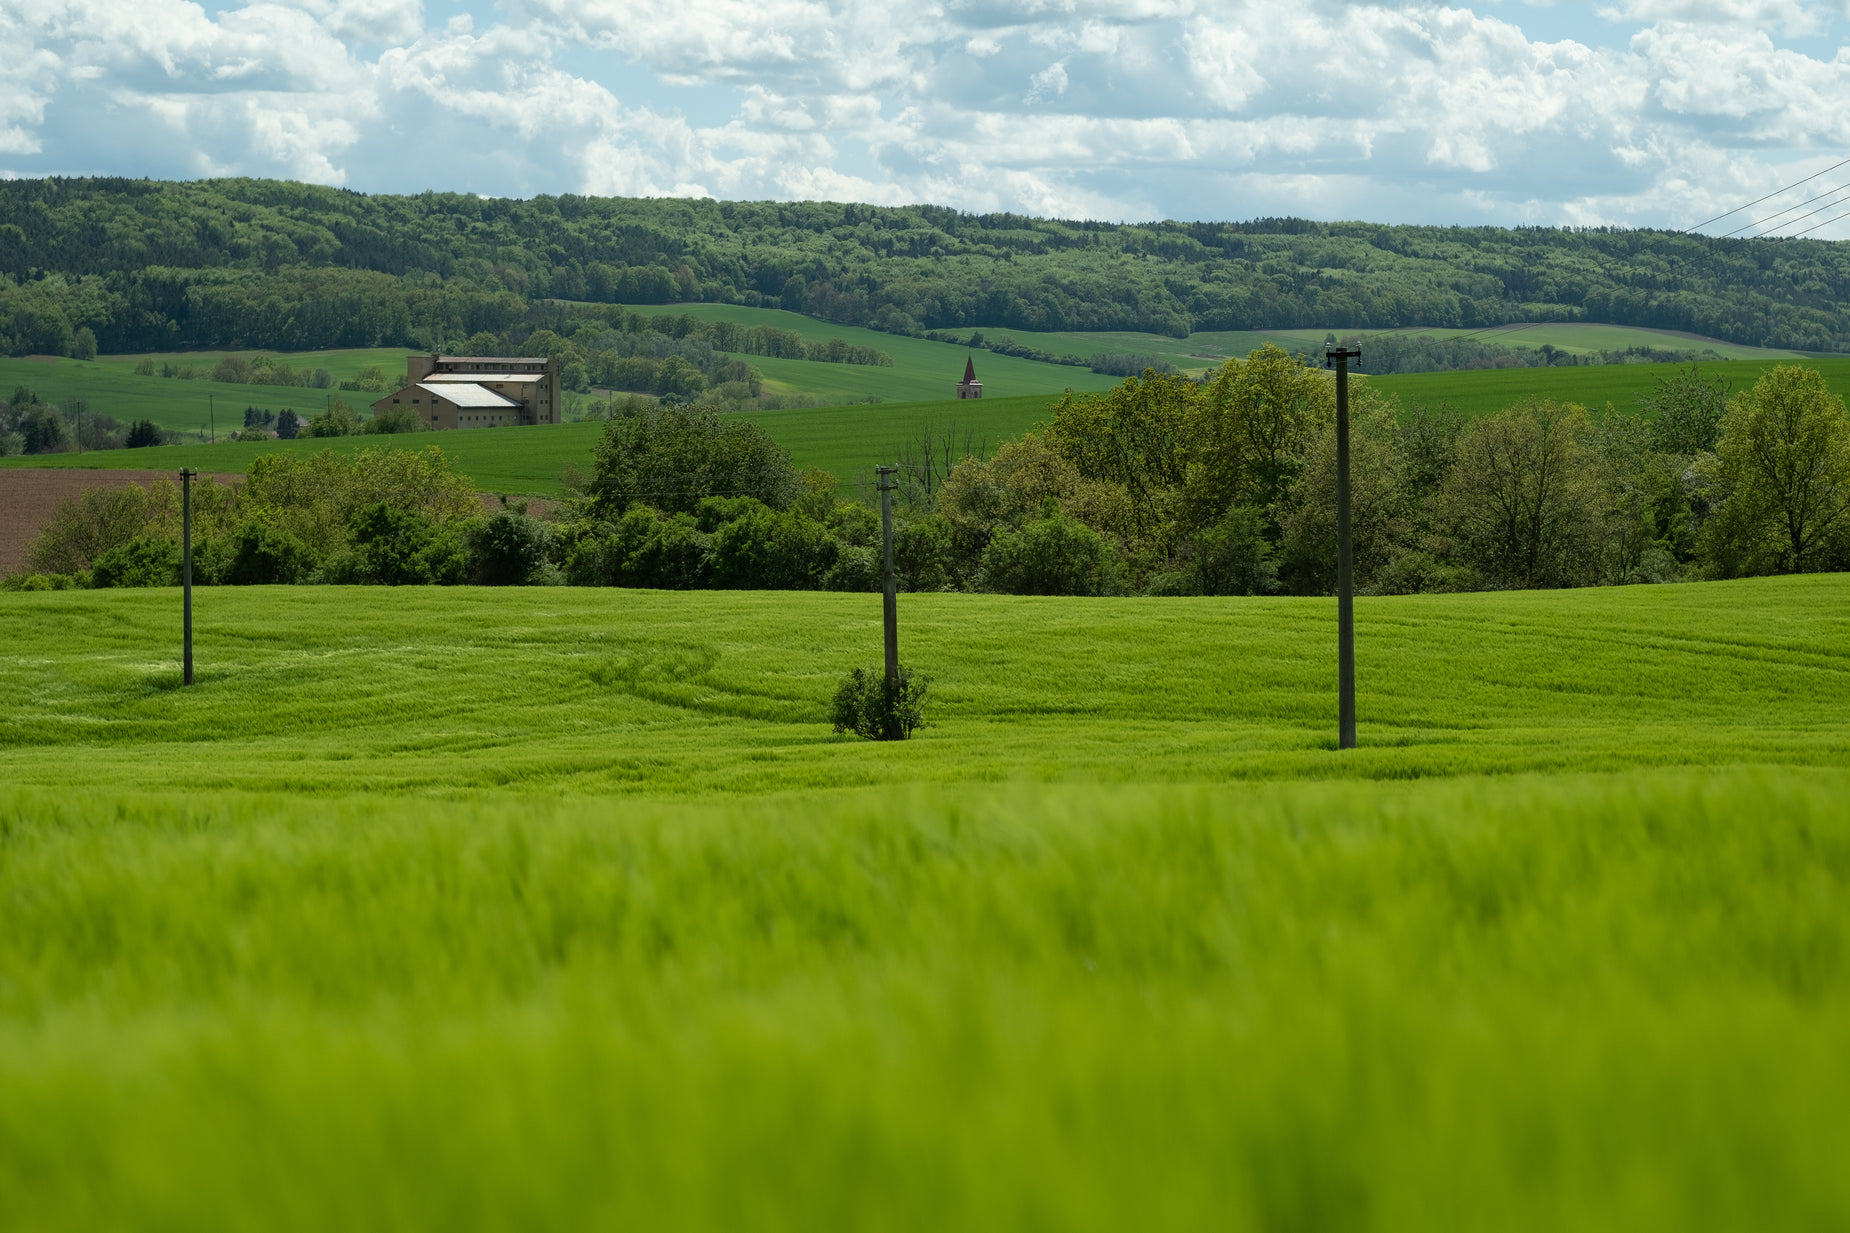 a green field has a farm house in the distance